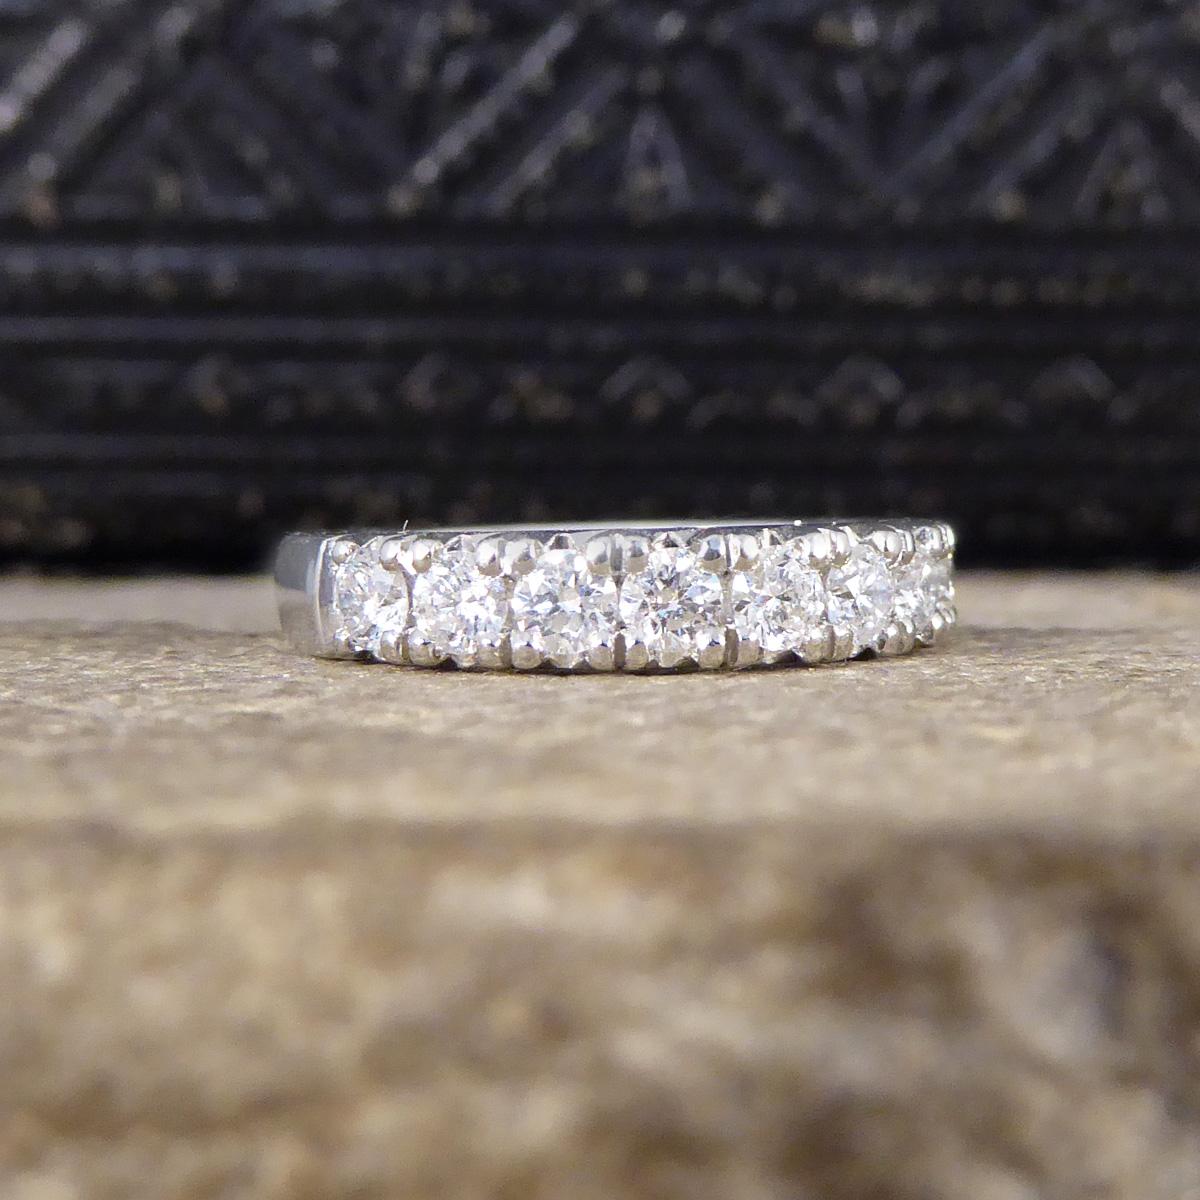 This ring is new and never worn. It features 11 Modern Brilliant Diamonds all of equal size sat next to each other along the head of the ring reached just slightly past half way making it more than half an eternity. It has a great eternity ring feel